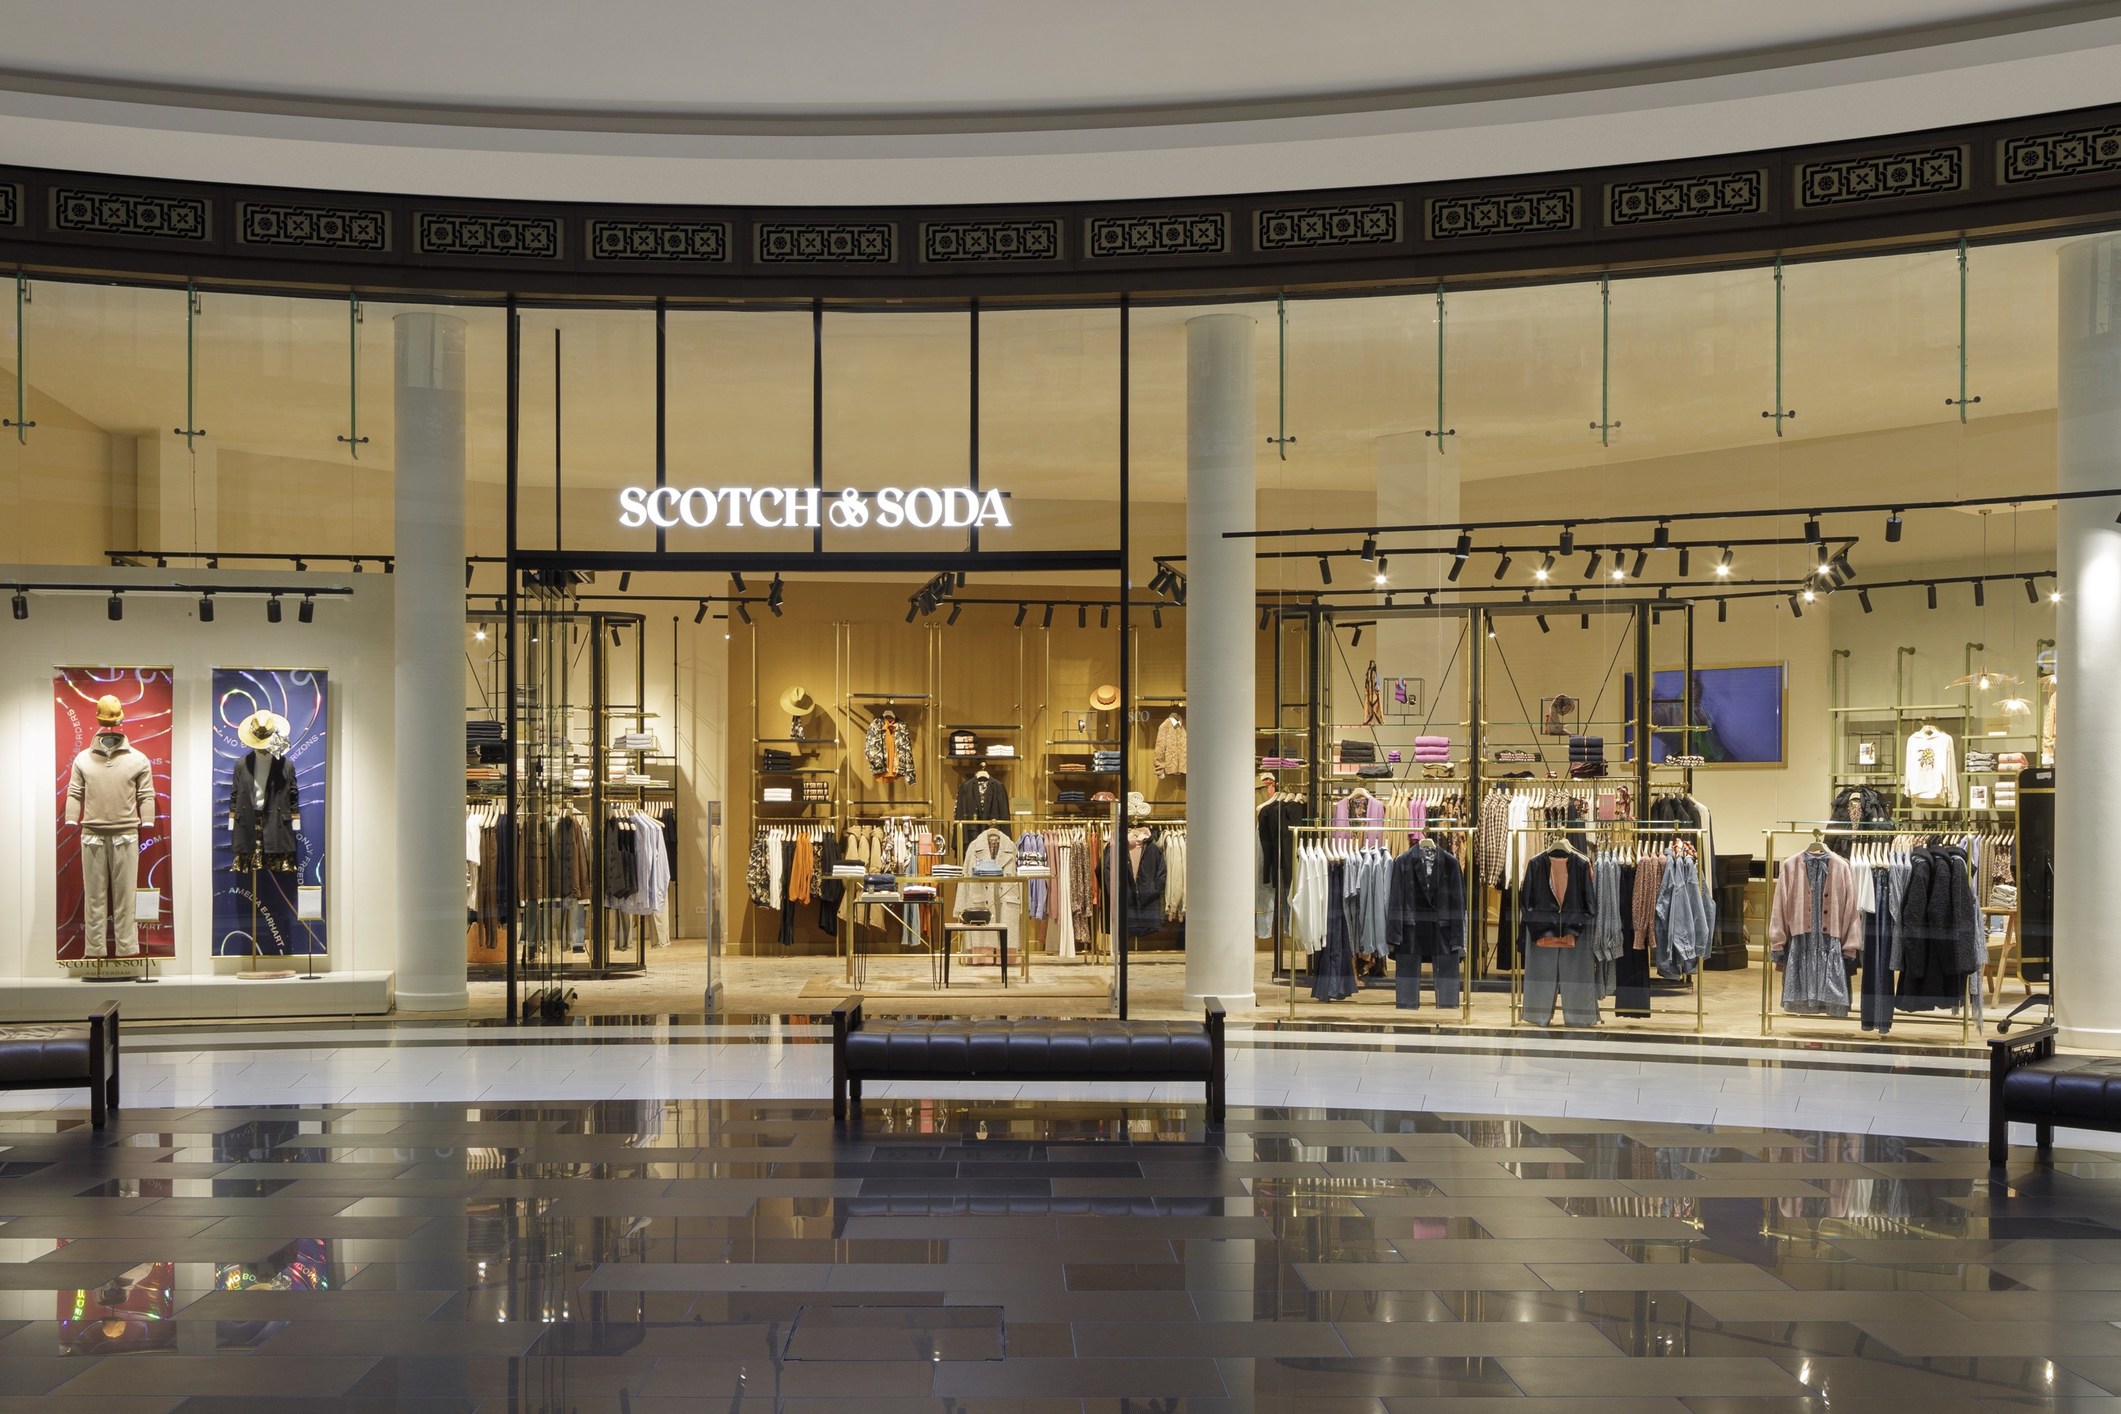 Scotch & Soda Accelerates Growth Strategy, Opening 22 New Shops